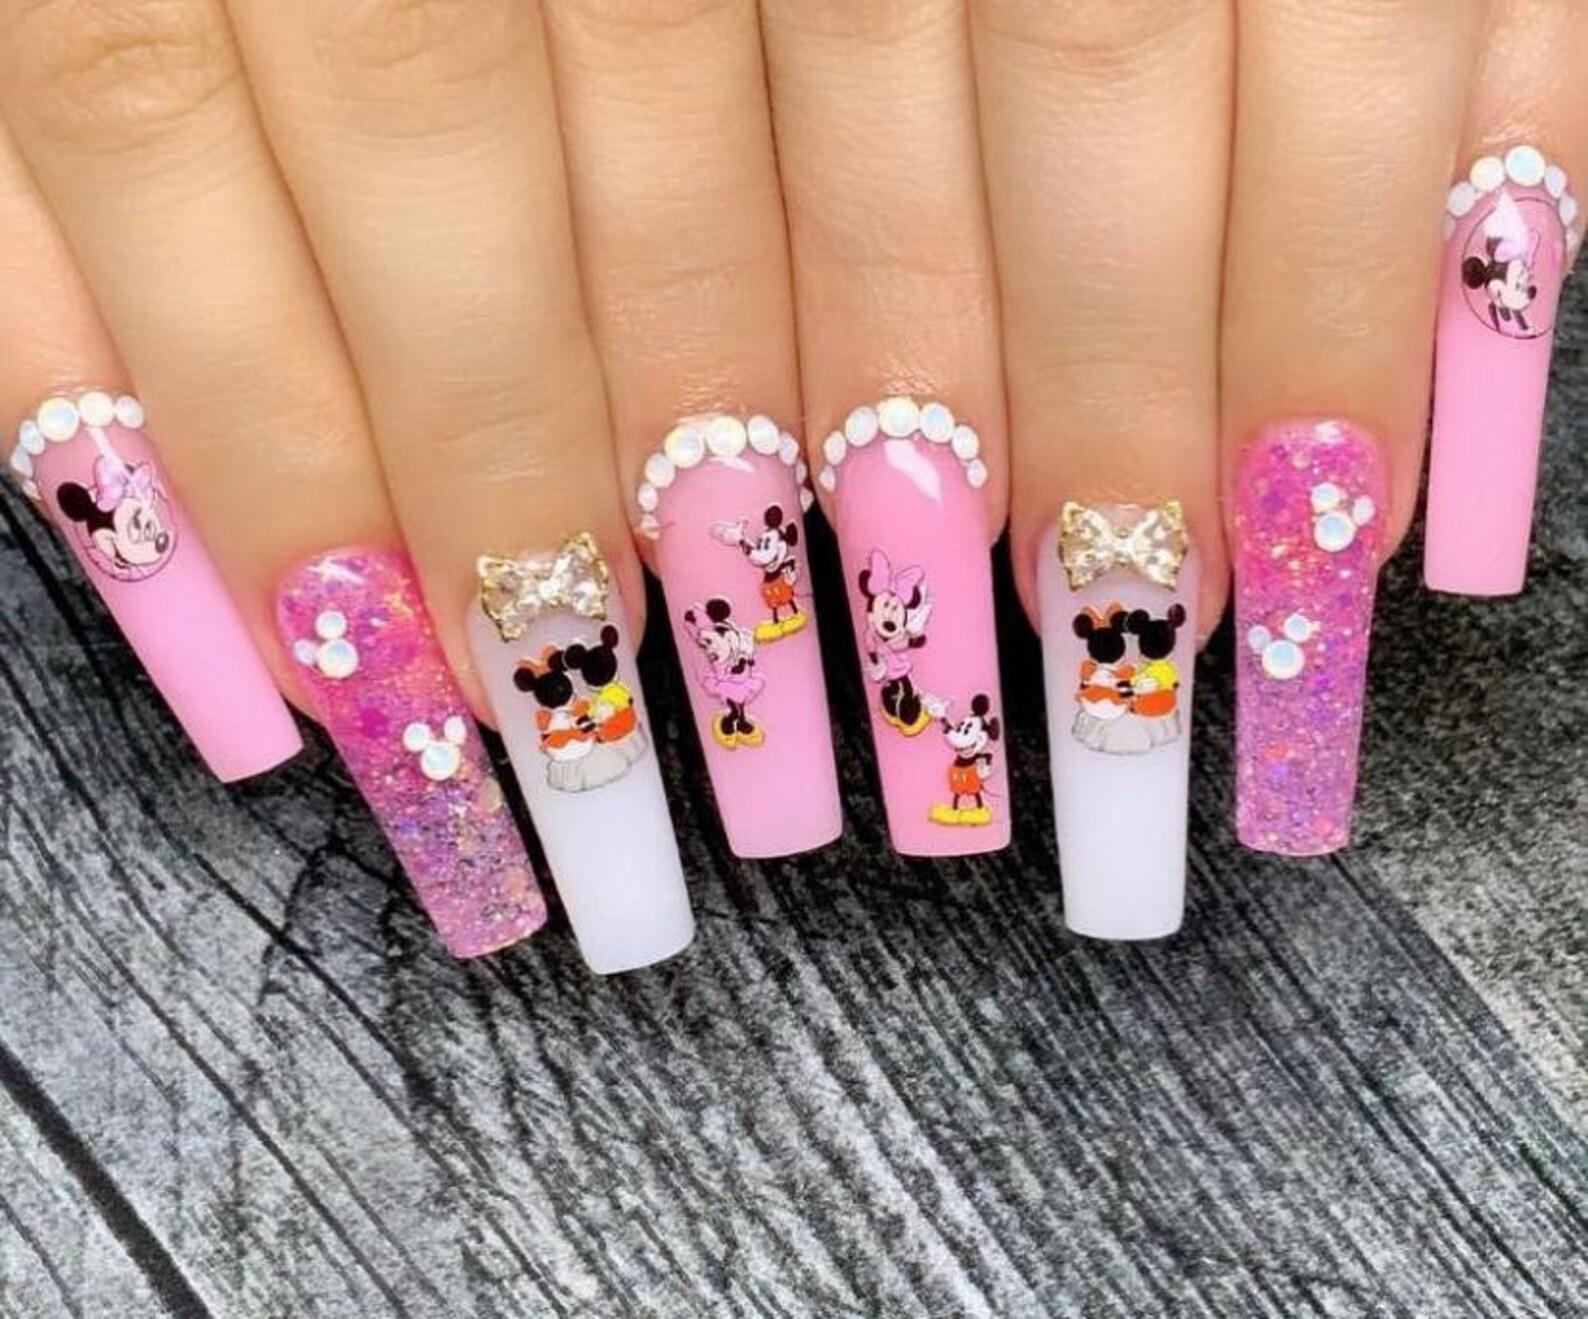 4. Cute Mouse Nails - wide 1